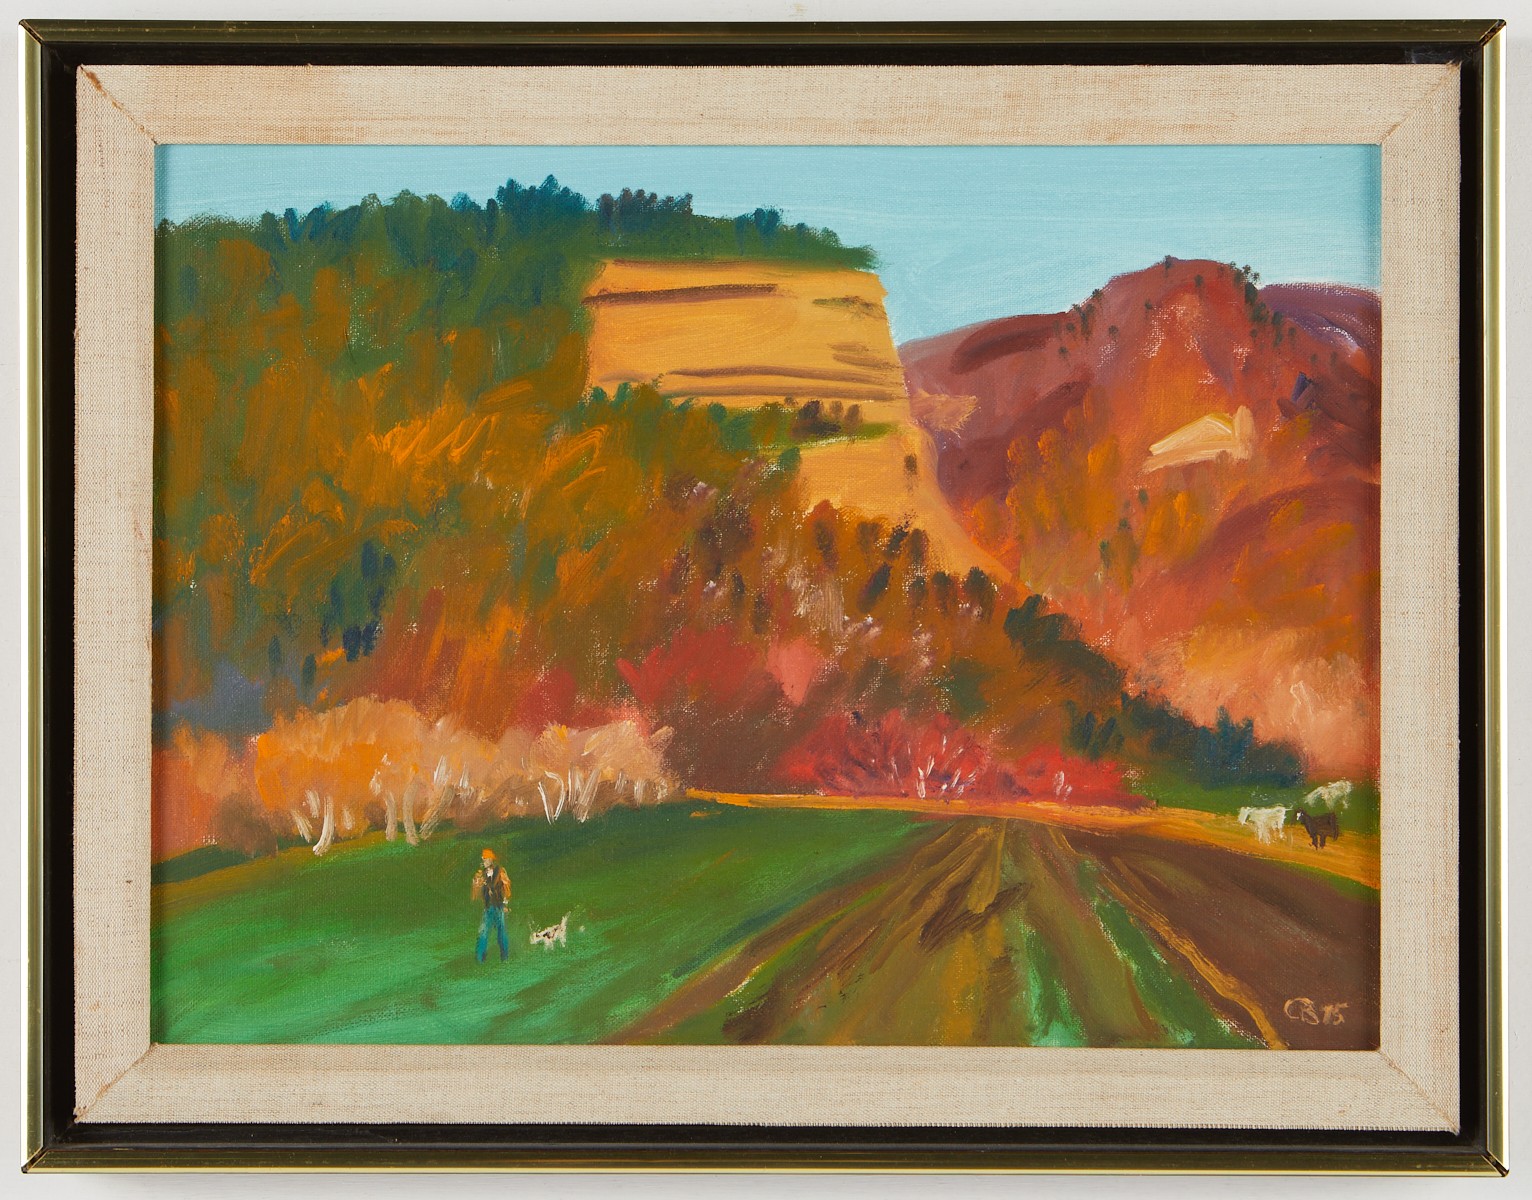 Cameron Booth Painting "Diamond Bluff" - Image 2 of 4